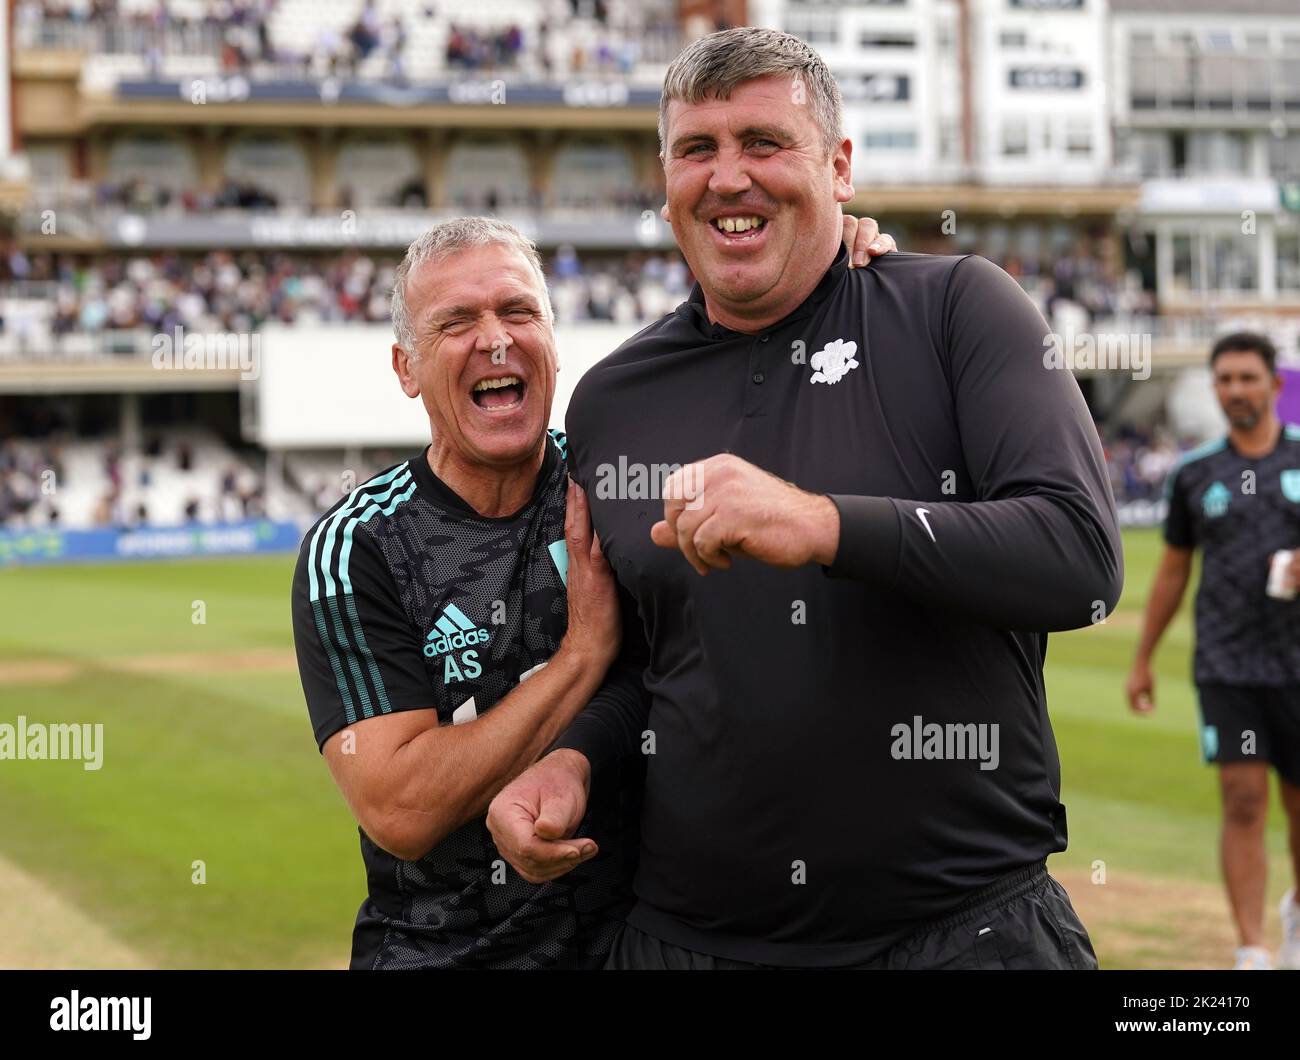 Surrey coach Alex Stuart (left) celebrates with the head groundsman, Lee Fortis, after winning the LV= Insurance County Championship division one title at the Oval, London. Picture date: Thursday September 22, 2022. Stock Photo